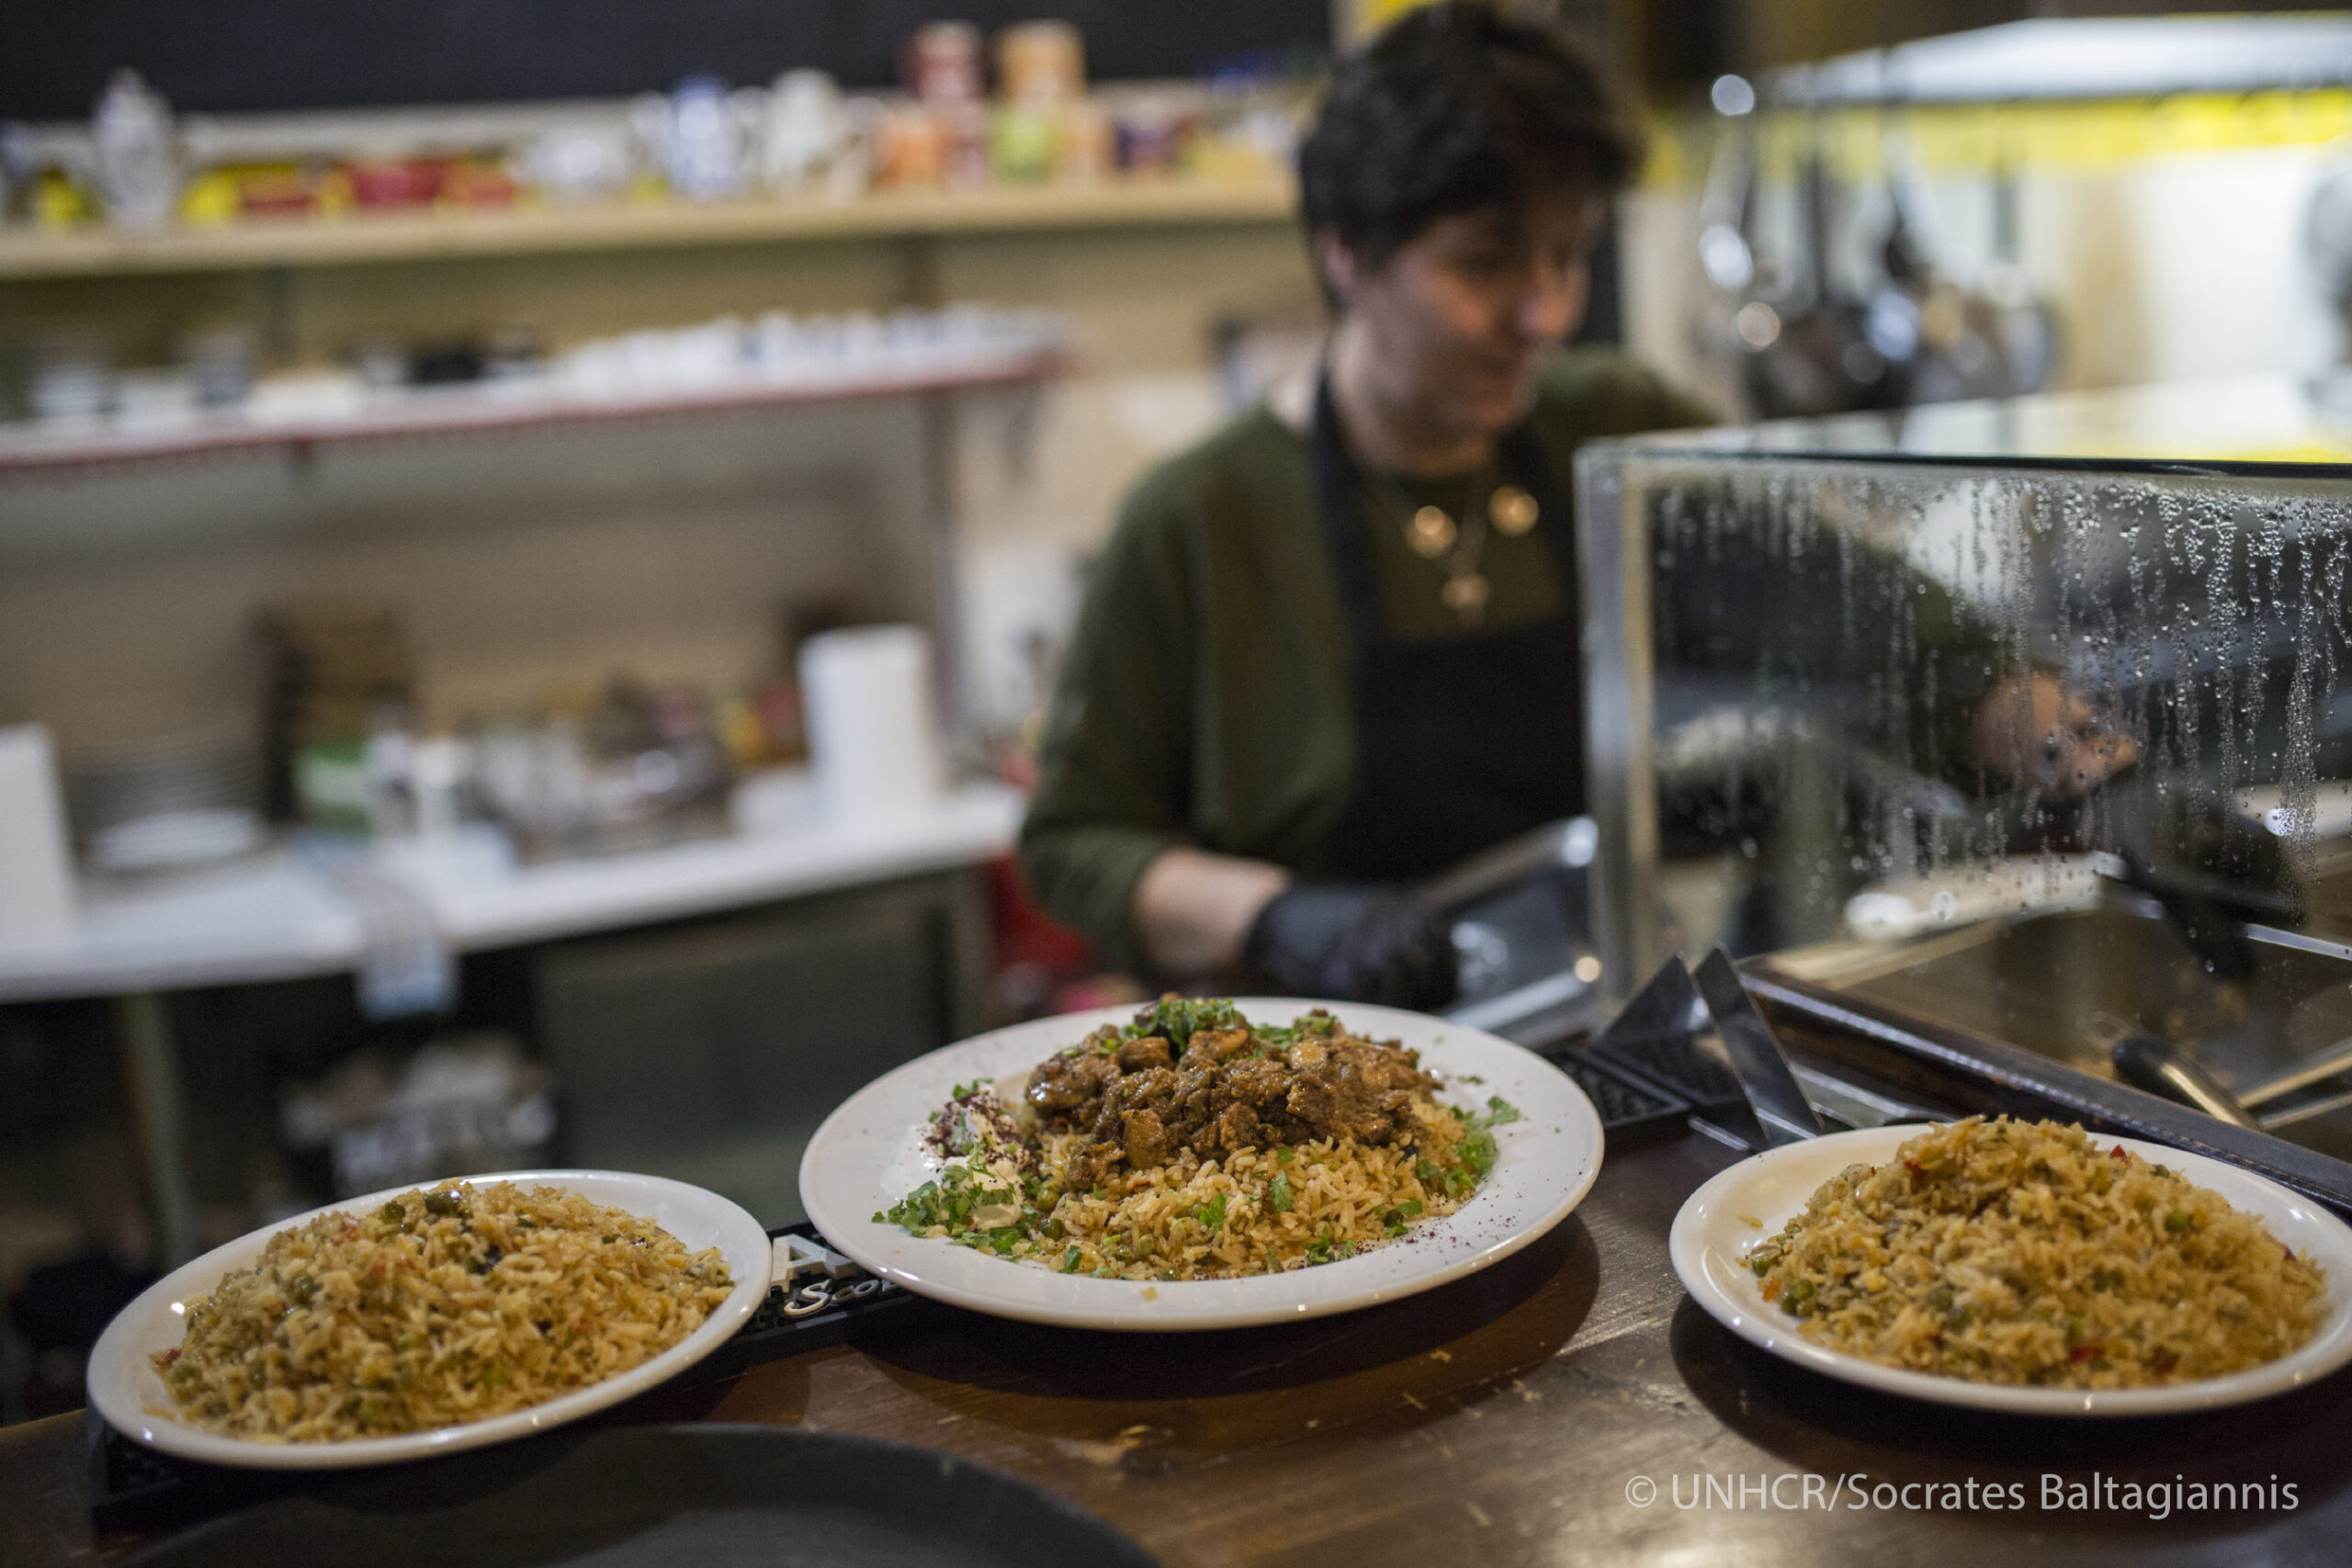 Greece. The island restaurant where refugees cook for locals